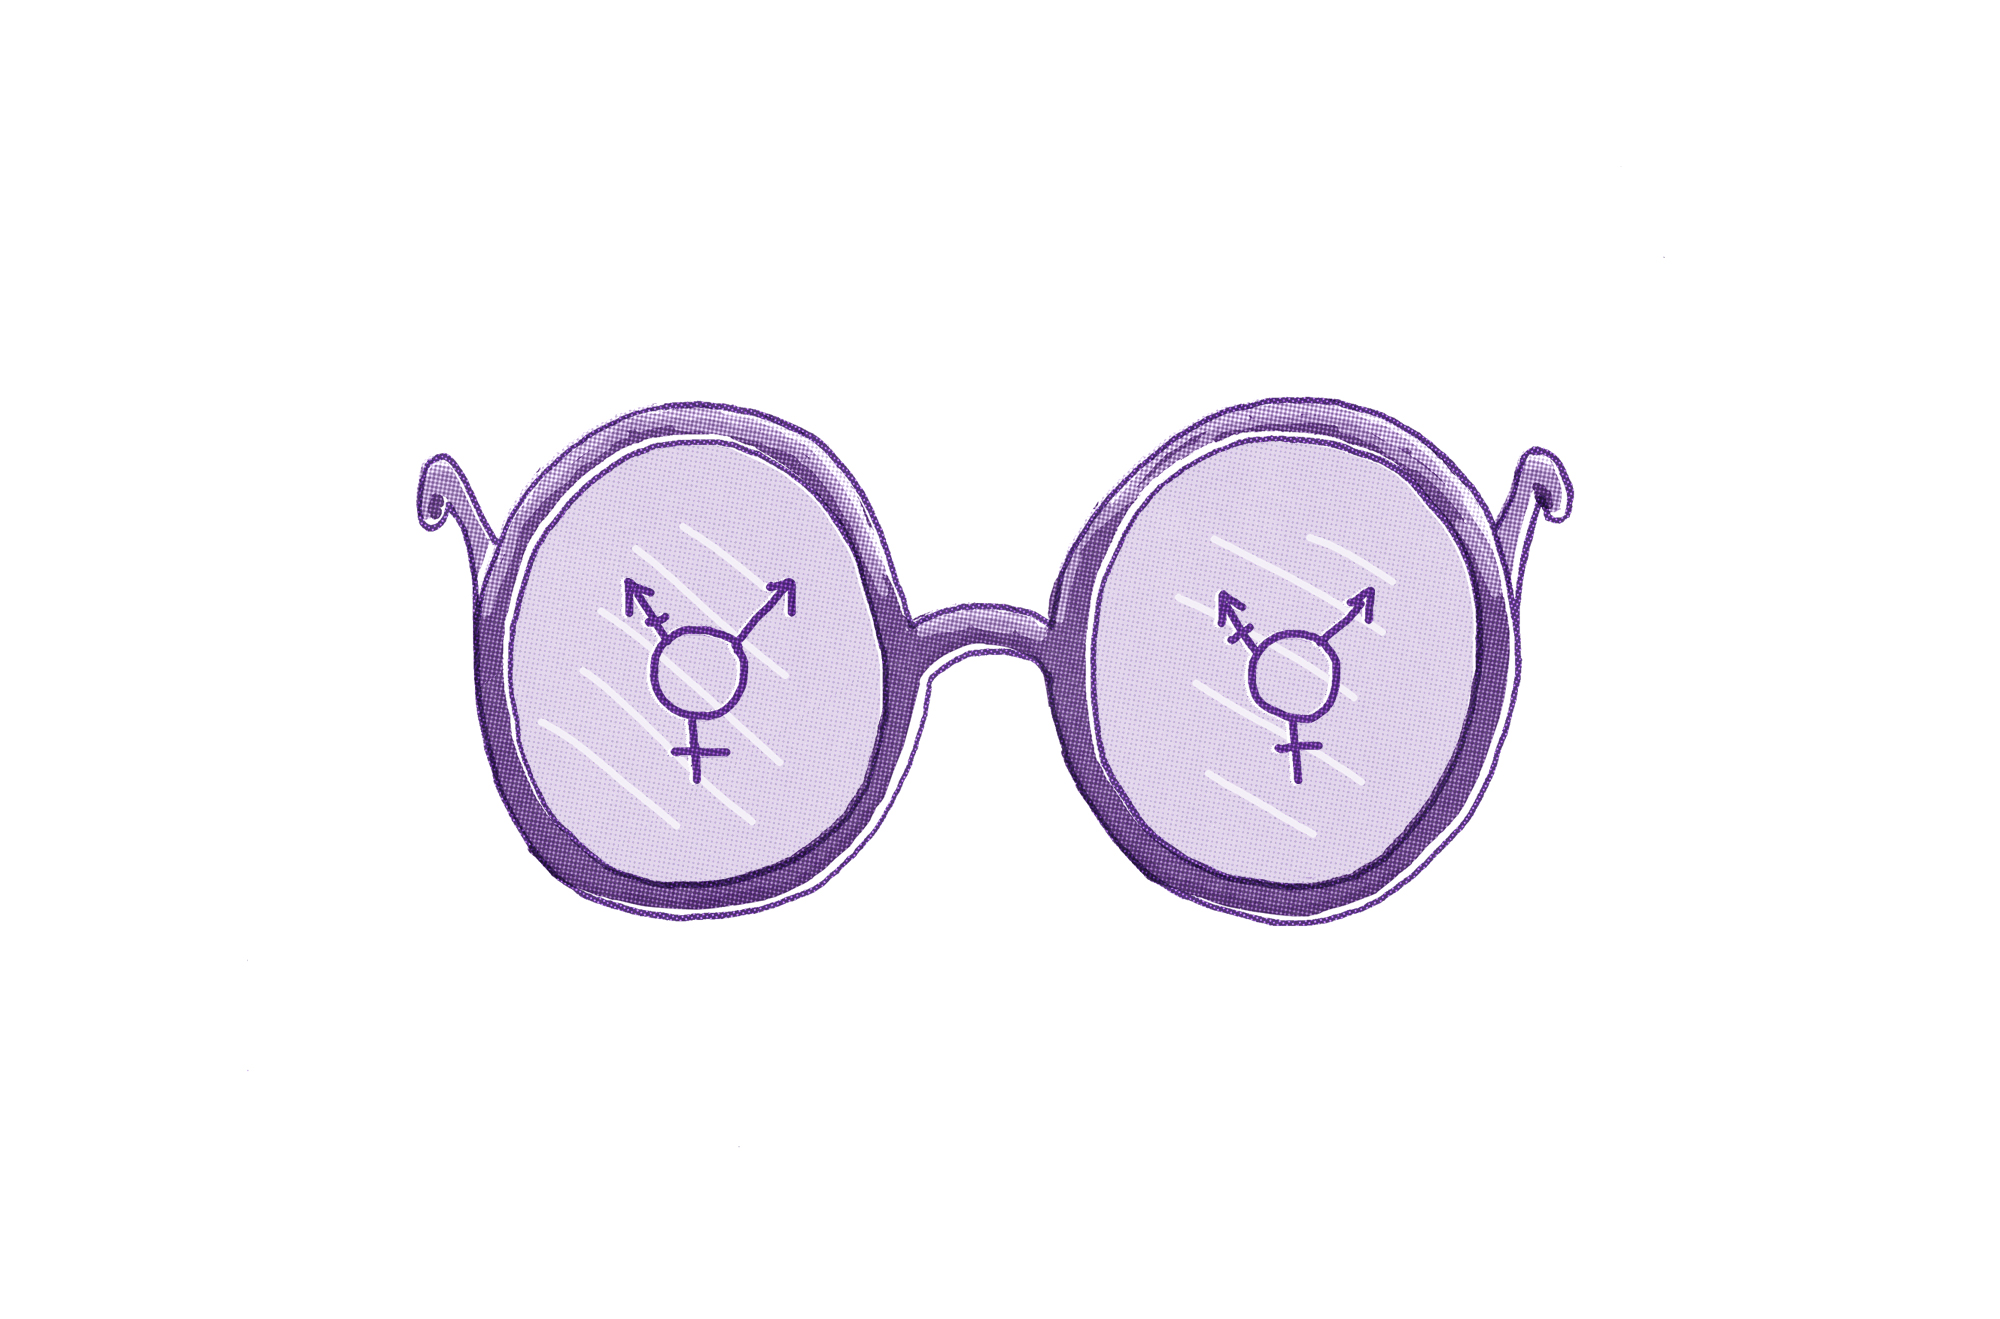 Illustration of a pair of purple glasses with gender symbols on the lenses. The left lens has a combined male and female symbol, while the right lens has a similar but slightly different combined gender symbol.